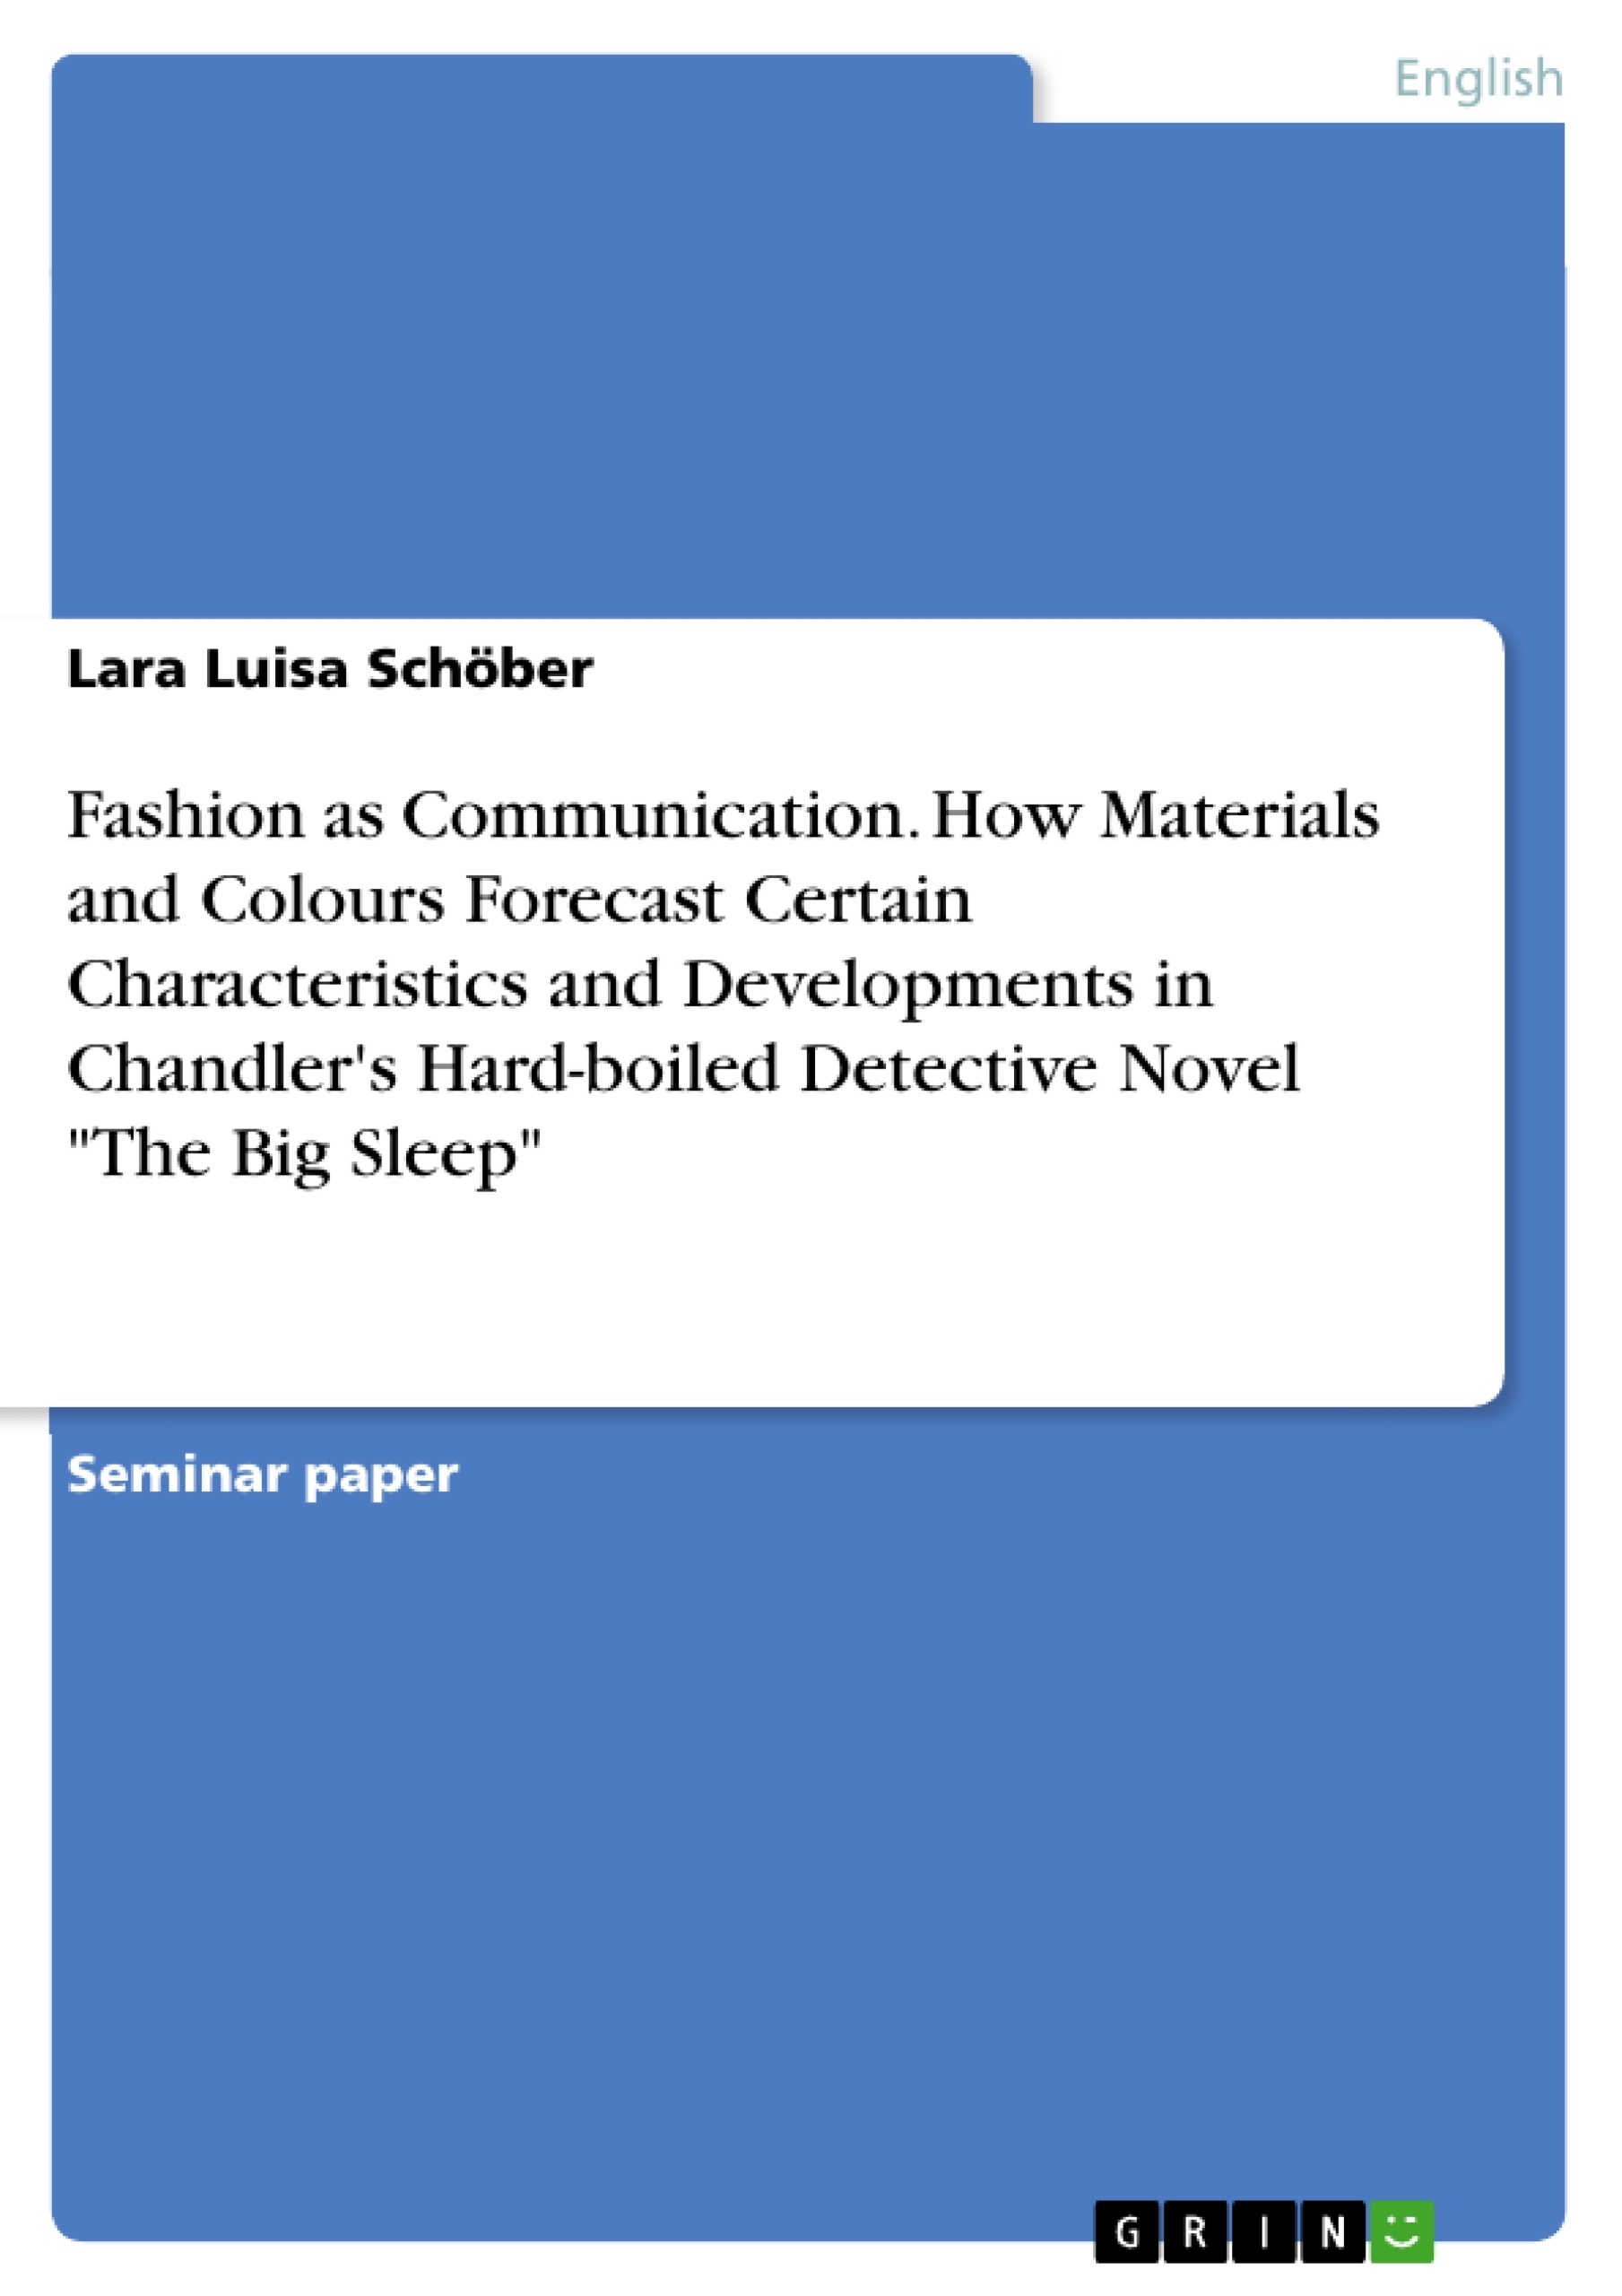 Title: Fashion as Communication. How Materials and Colours Forecast Certain Characteristics and Developments in Chandler's Hard-boiled Detective Novel "The Big Sleep"